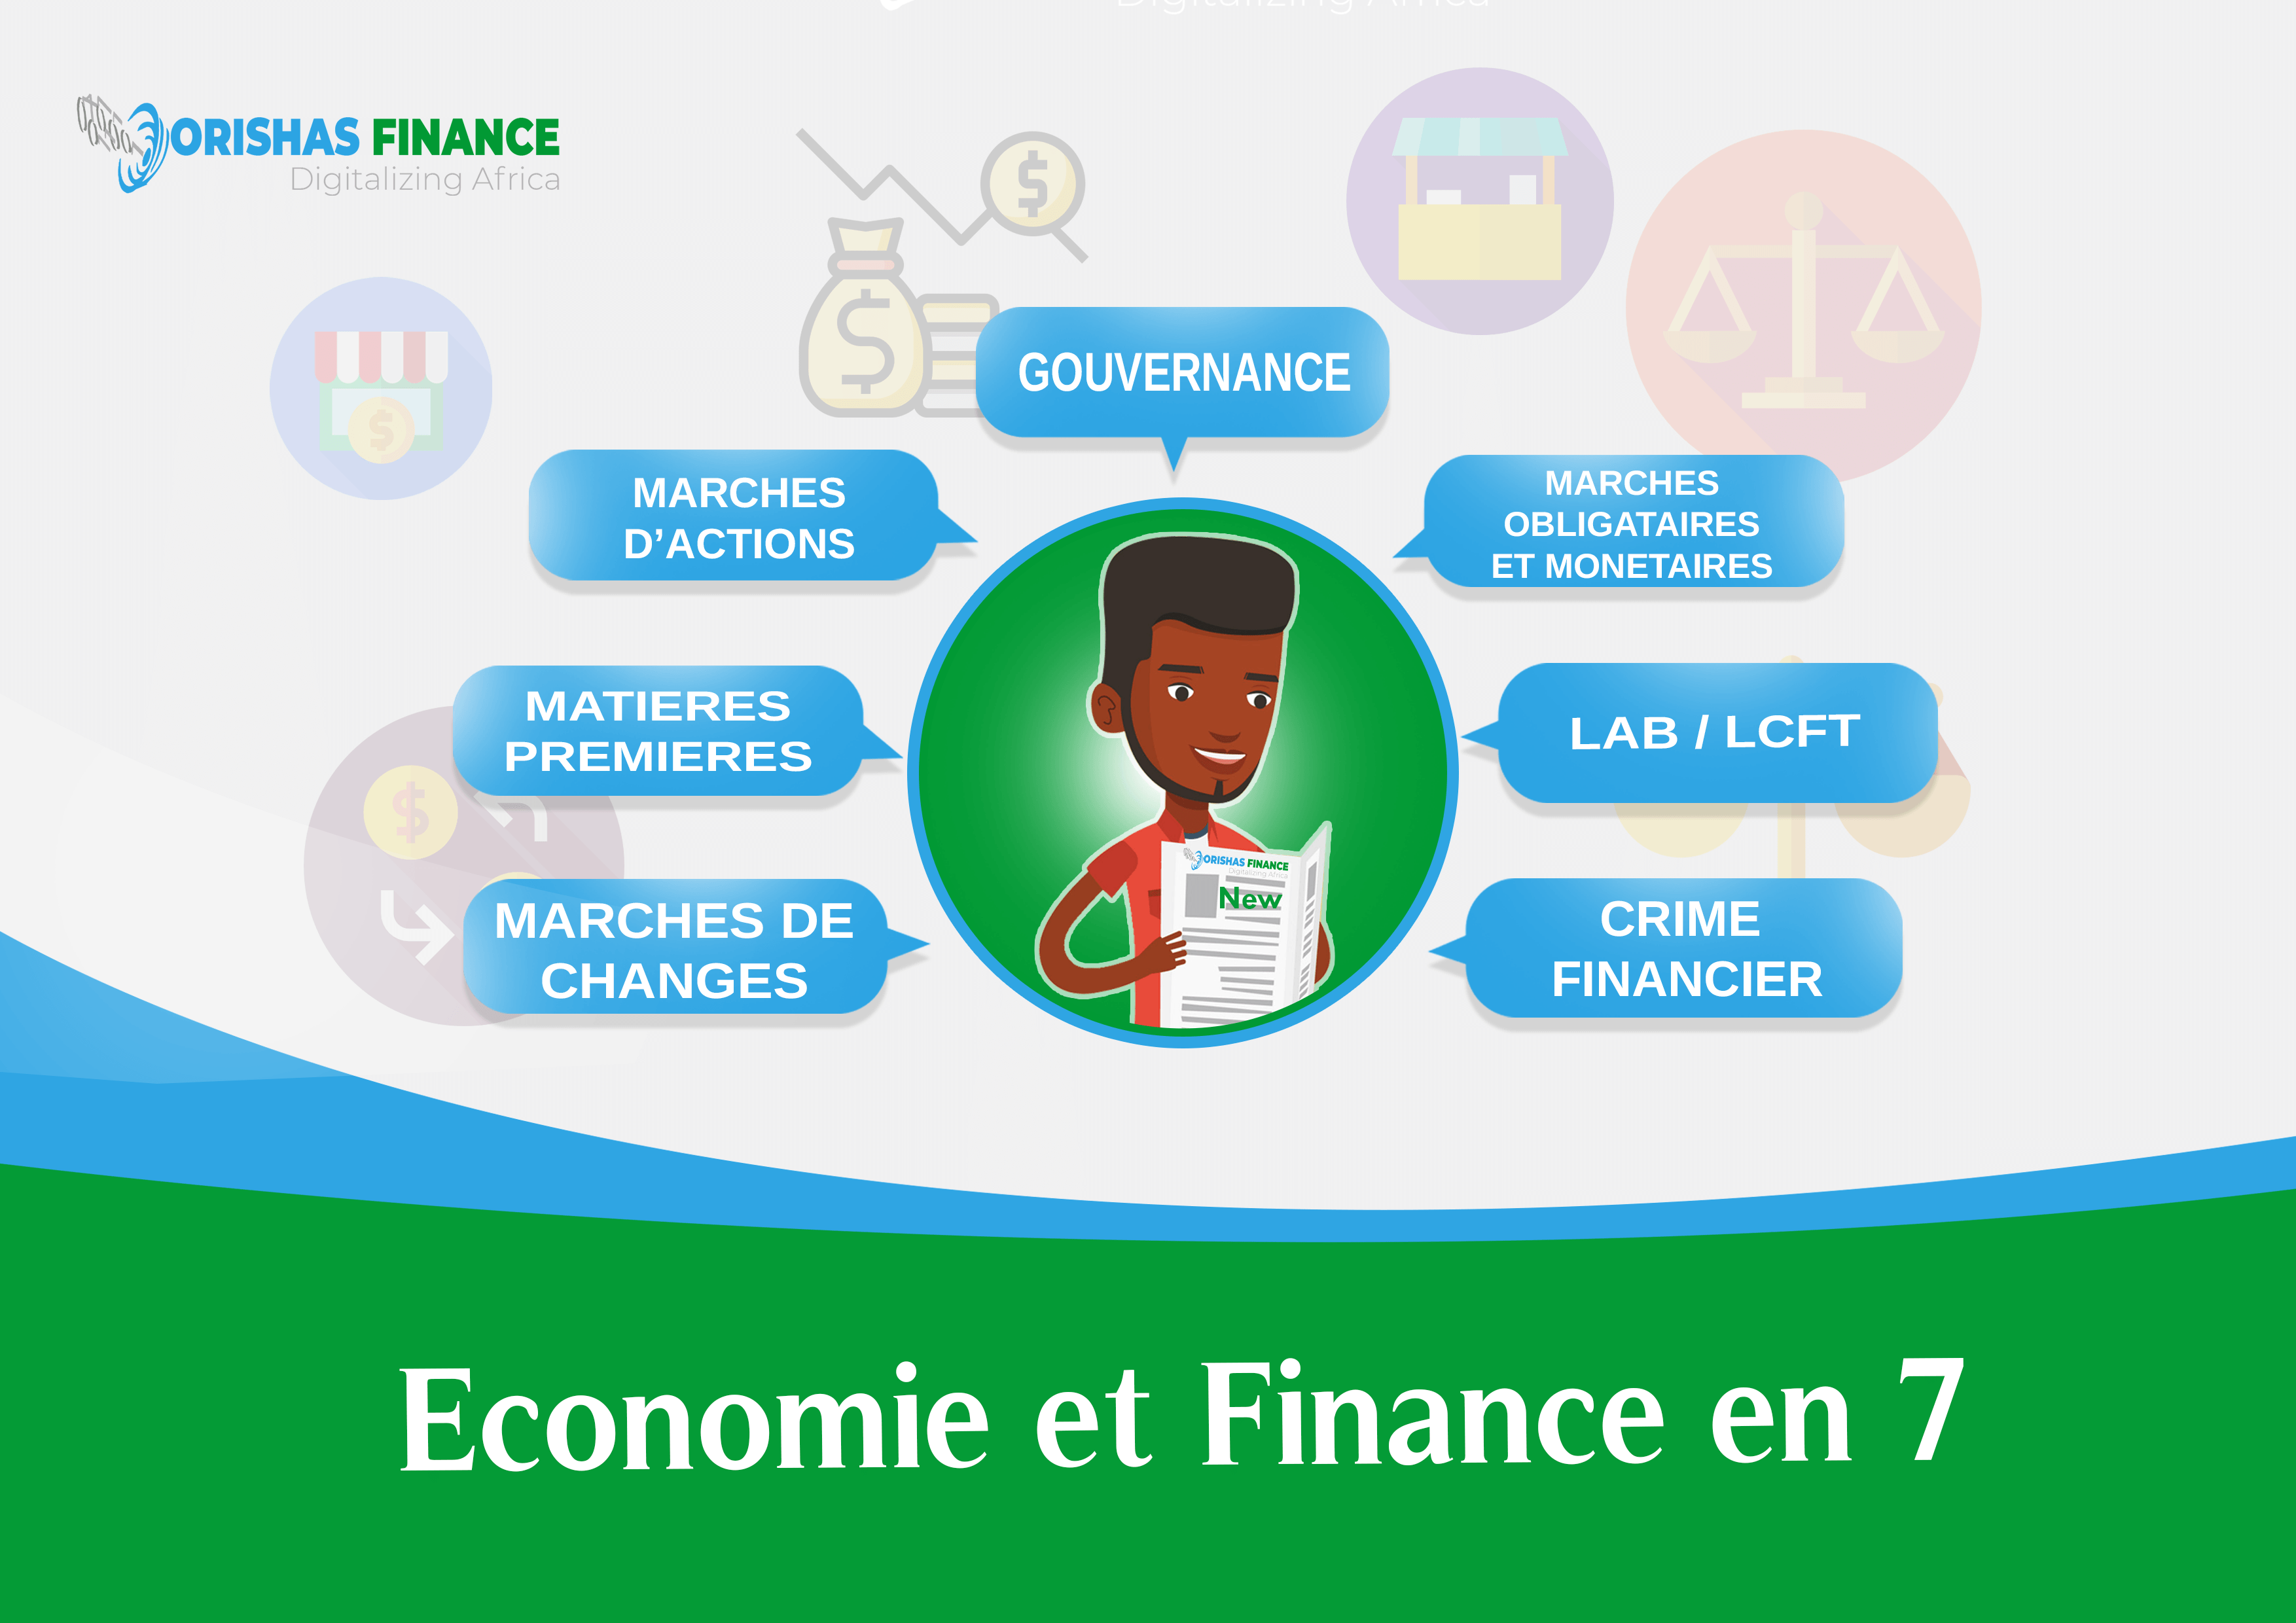  Economy and Finance in 7 from June 21 to 25, 2021 